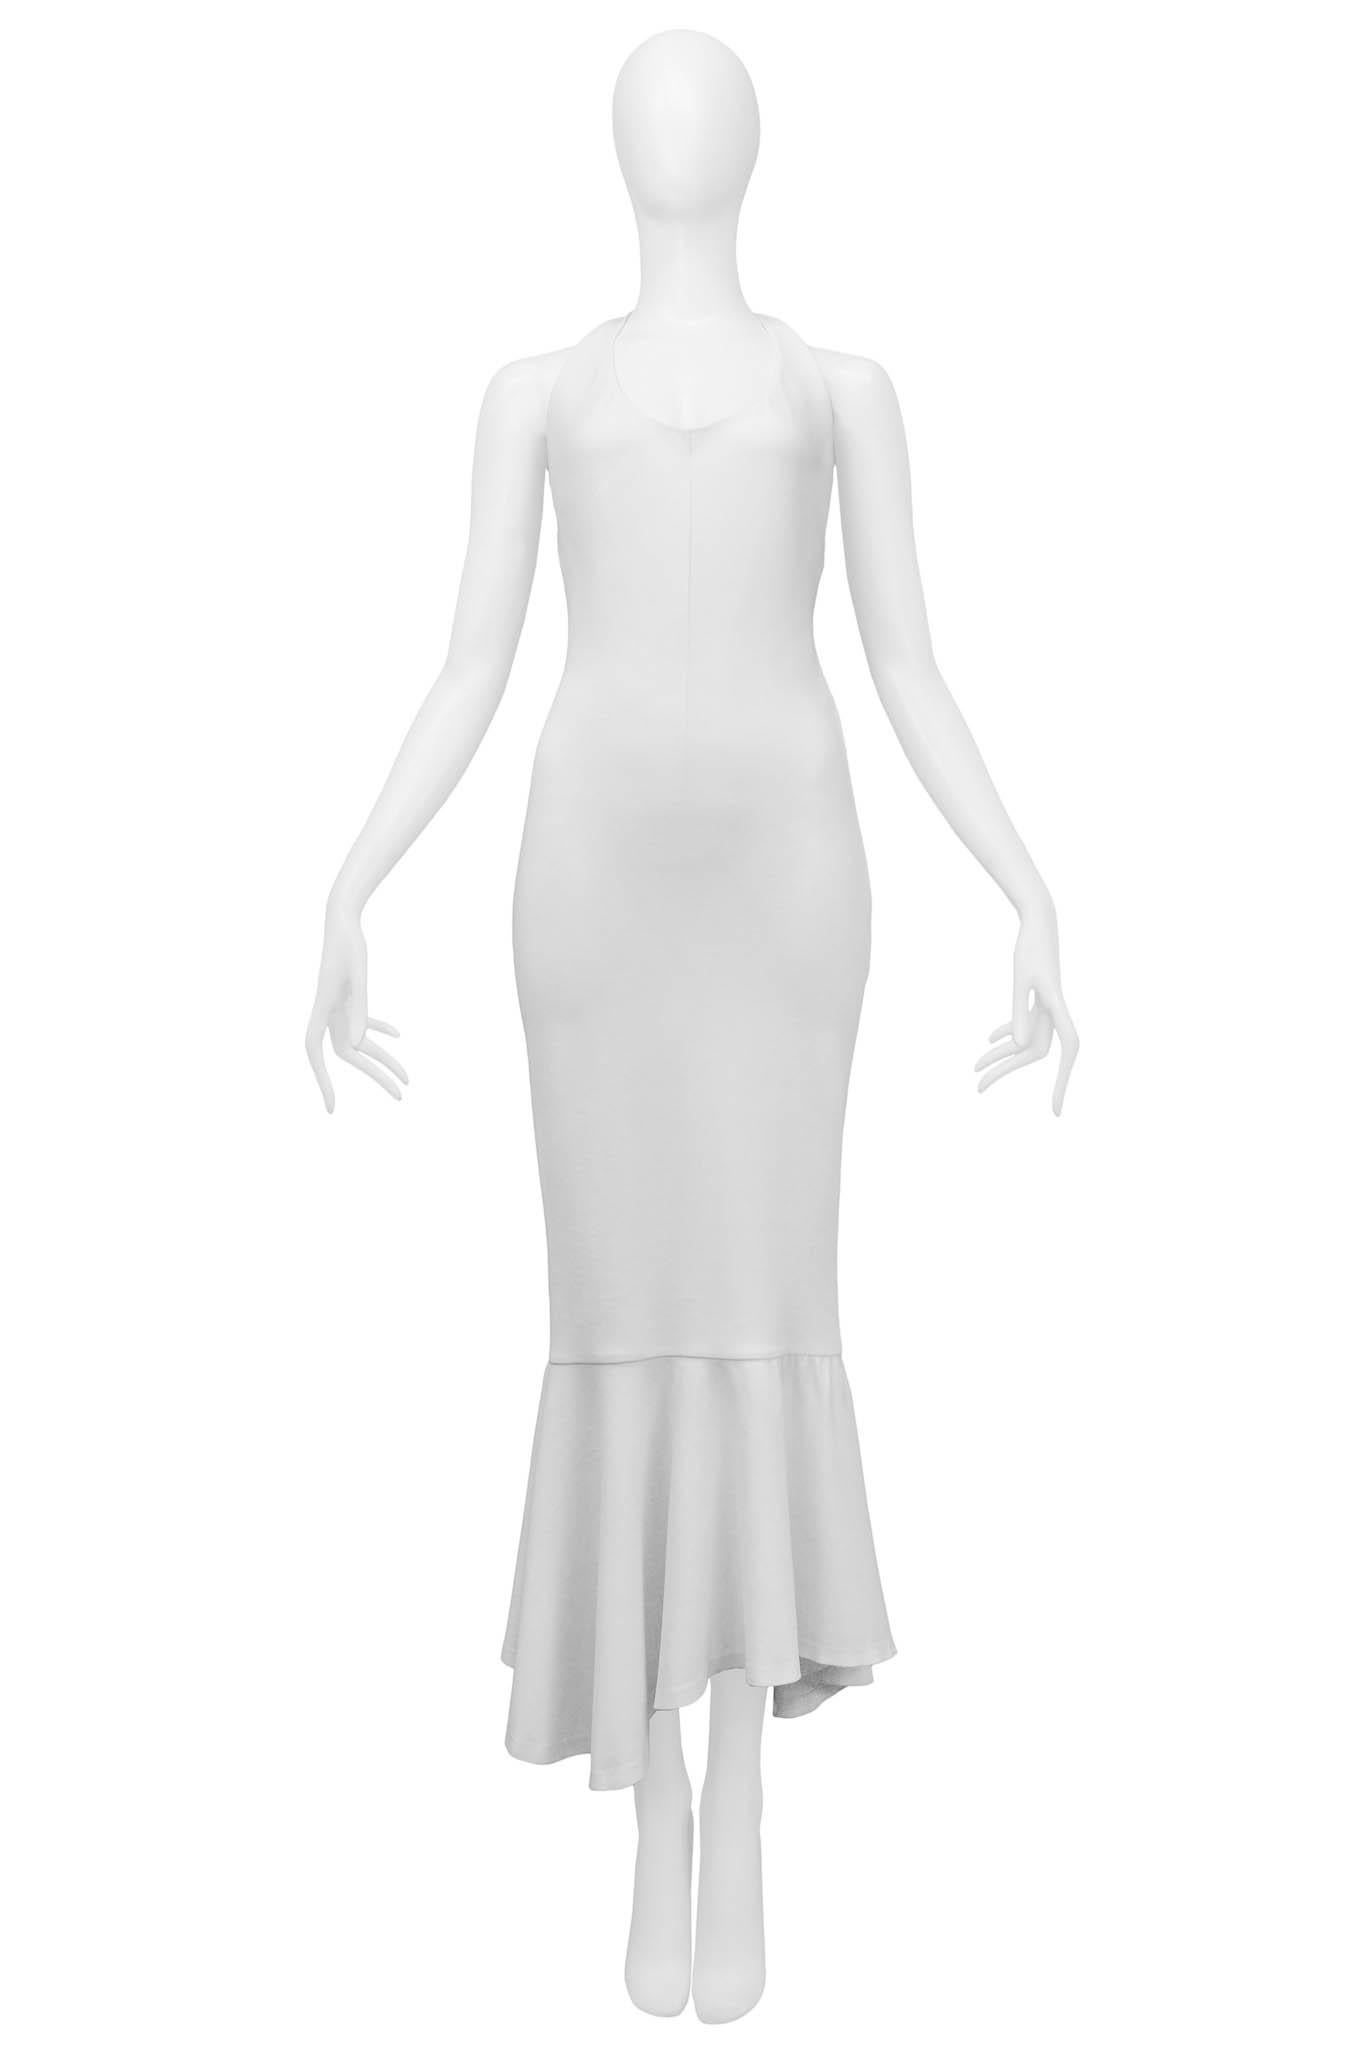 Resurrection Vintage is excited to offer a vintage Dolce & Gabbana white halter dress, featuring an asymmetrical ruffle hem, halter front that ties at the back neckline, and an invisible zipper down the back.

Dolce & Gabbana
Size 44
Rayon, Nylon,